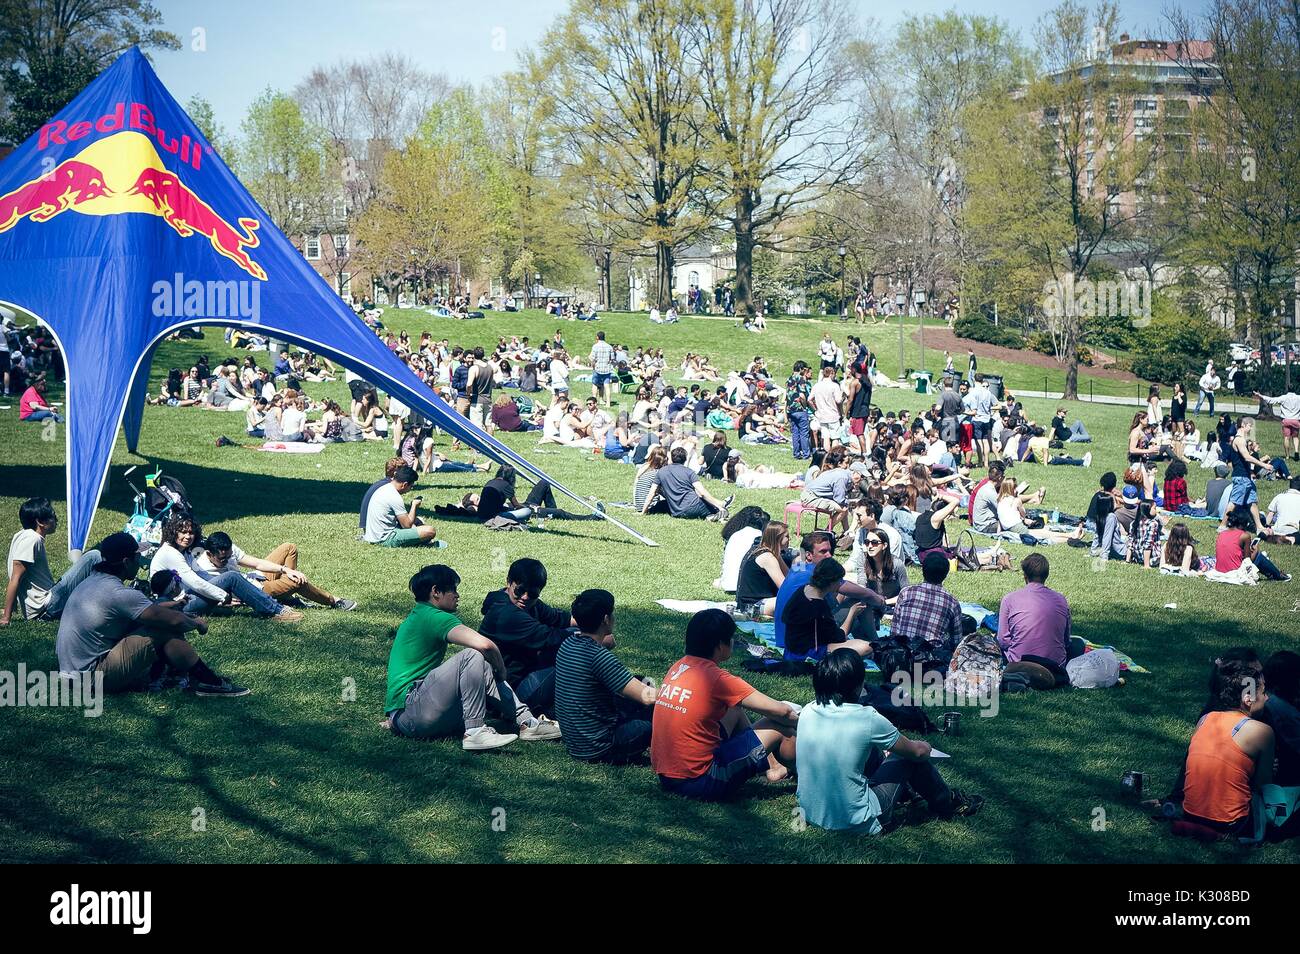 Dozens of students huddle and sunbathe on the grassy Beach, with drinks all around and a large Red Bull tent to the left, during Spring Fair, a student-run spring carnival at Johns Hopkins University, Baltimore, Maryland, April, 2016. Courtesy Eric Chen. Stock Photo